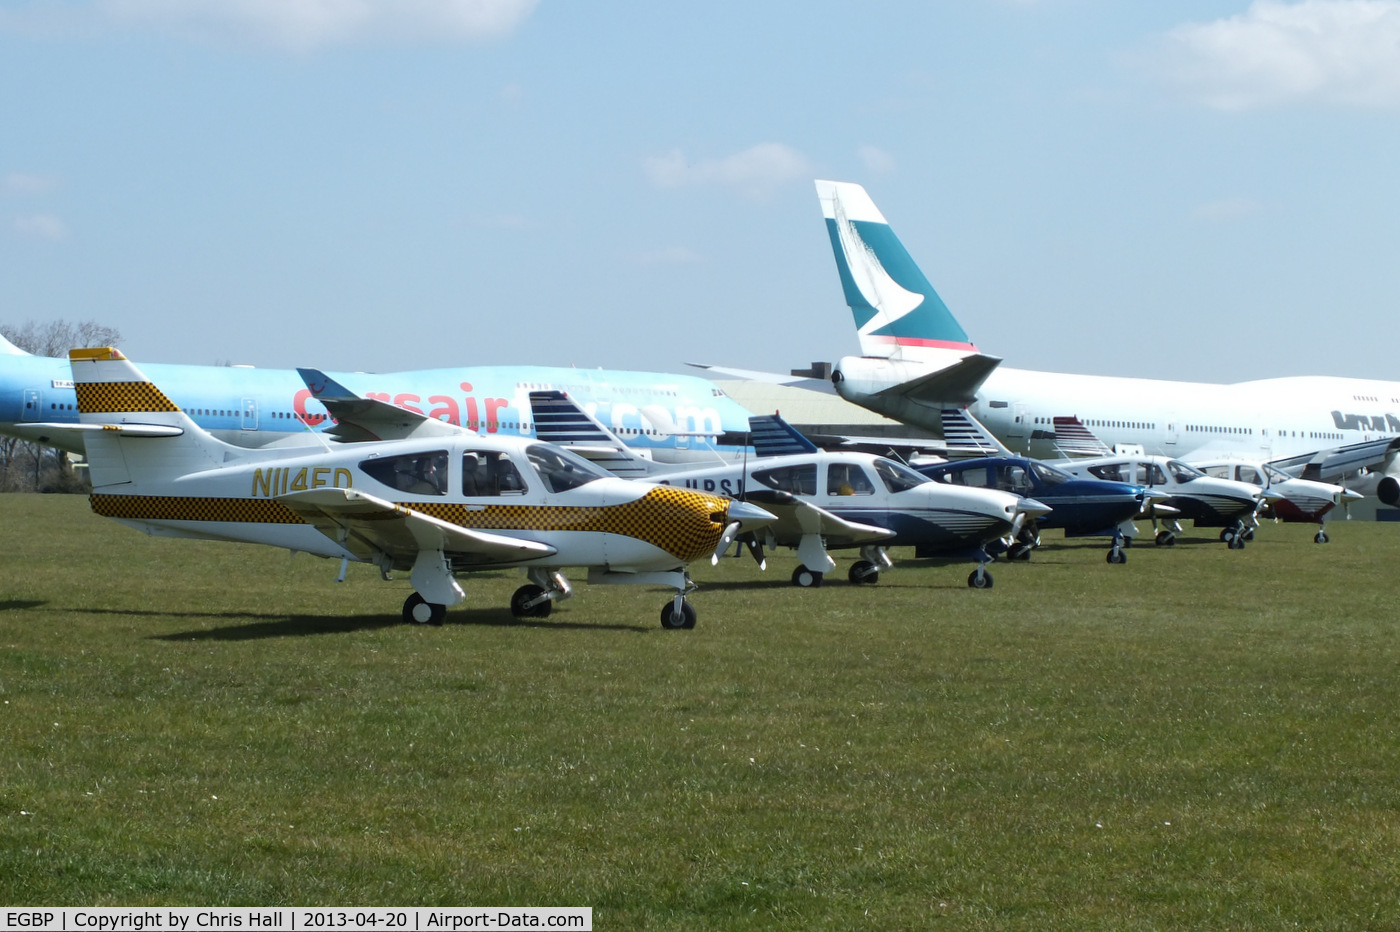 Kemble Airport, Kemble, England United Kingdom (EGBP) - Rockwell Commander fly-in at Kemble